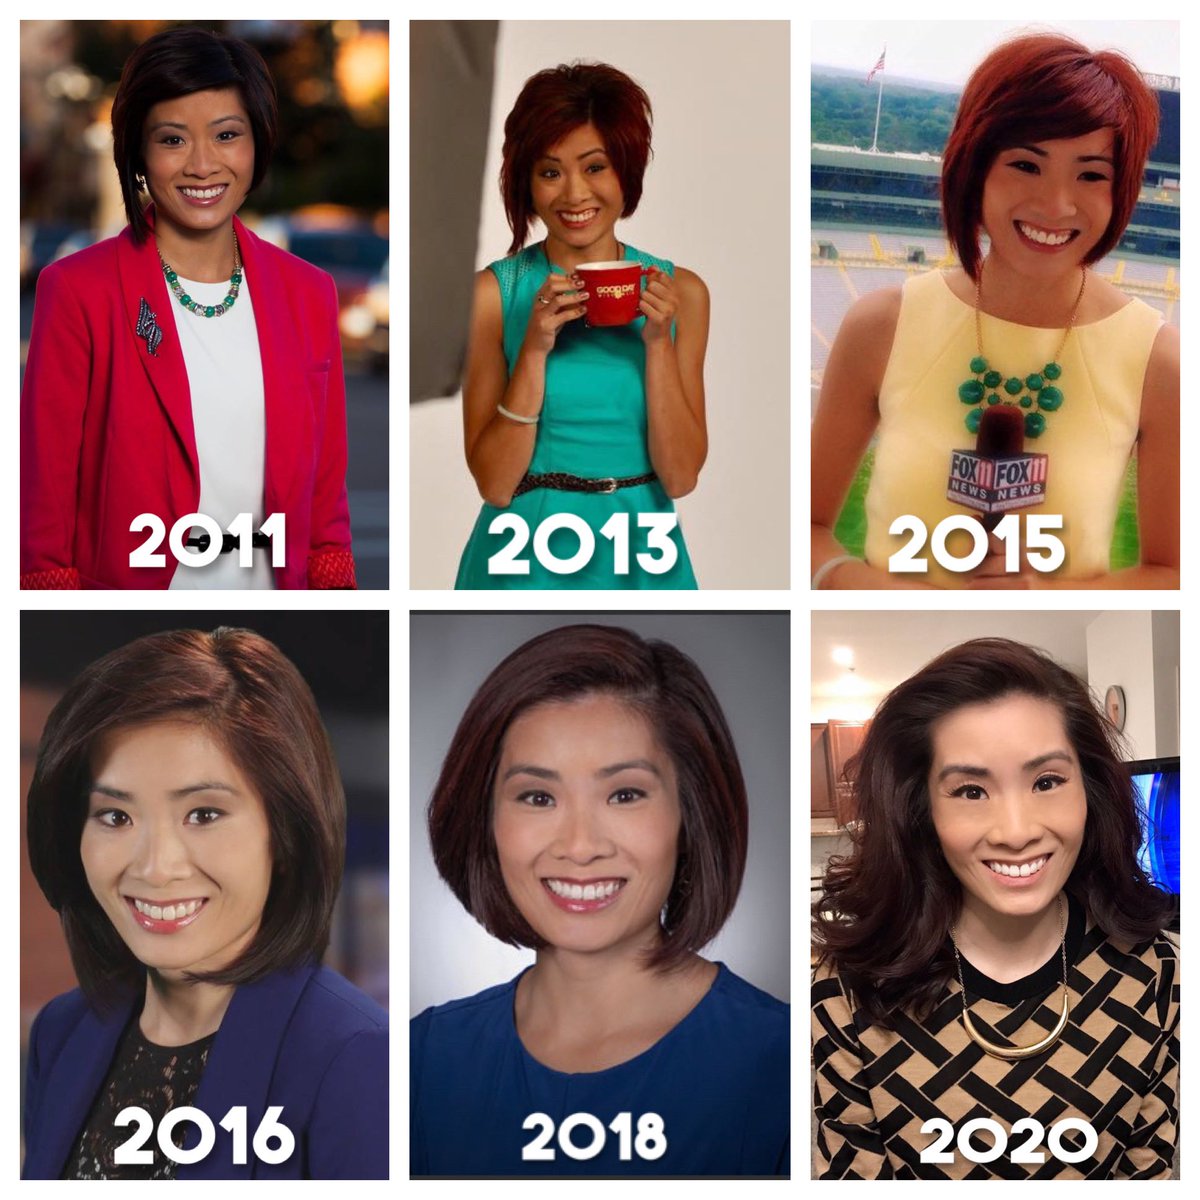 In honor of #HairstylistAppreciationDay here’s a #ThrowbackThursday of my journey in hair throughout my career! Shoutout to @Kolvessalon in La Crosse, @SalonCTI in Appleton, @TheHairDeptIN in Fort Wayne and Hair Geek in Milwaukee for coming along for the ride! 💇🏻‍♀️💁🏻‍♀️